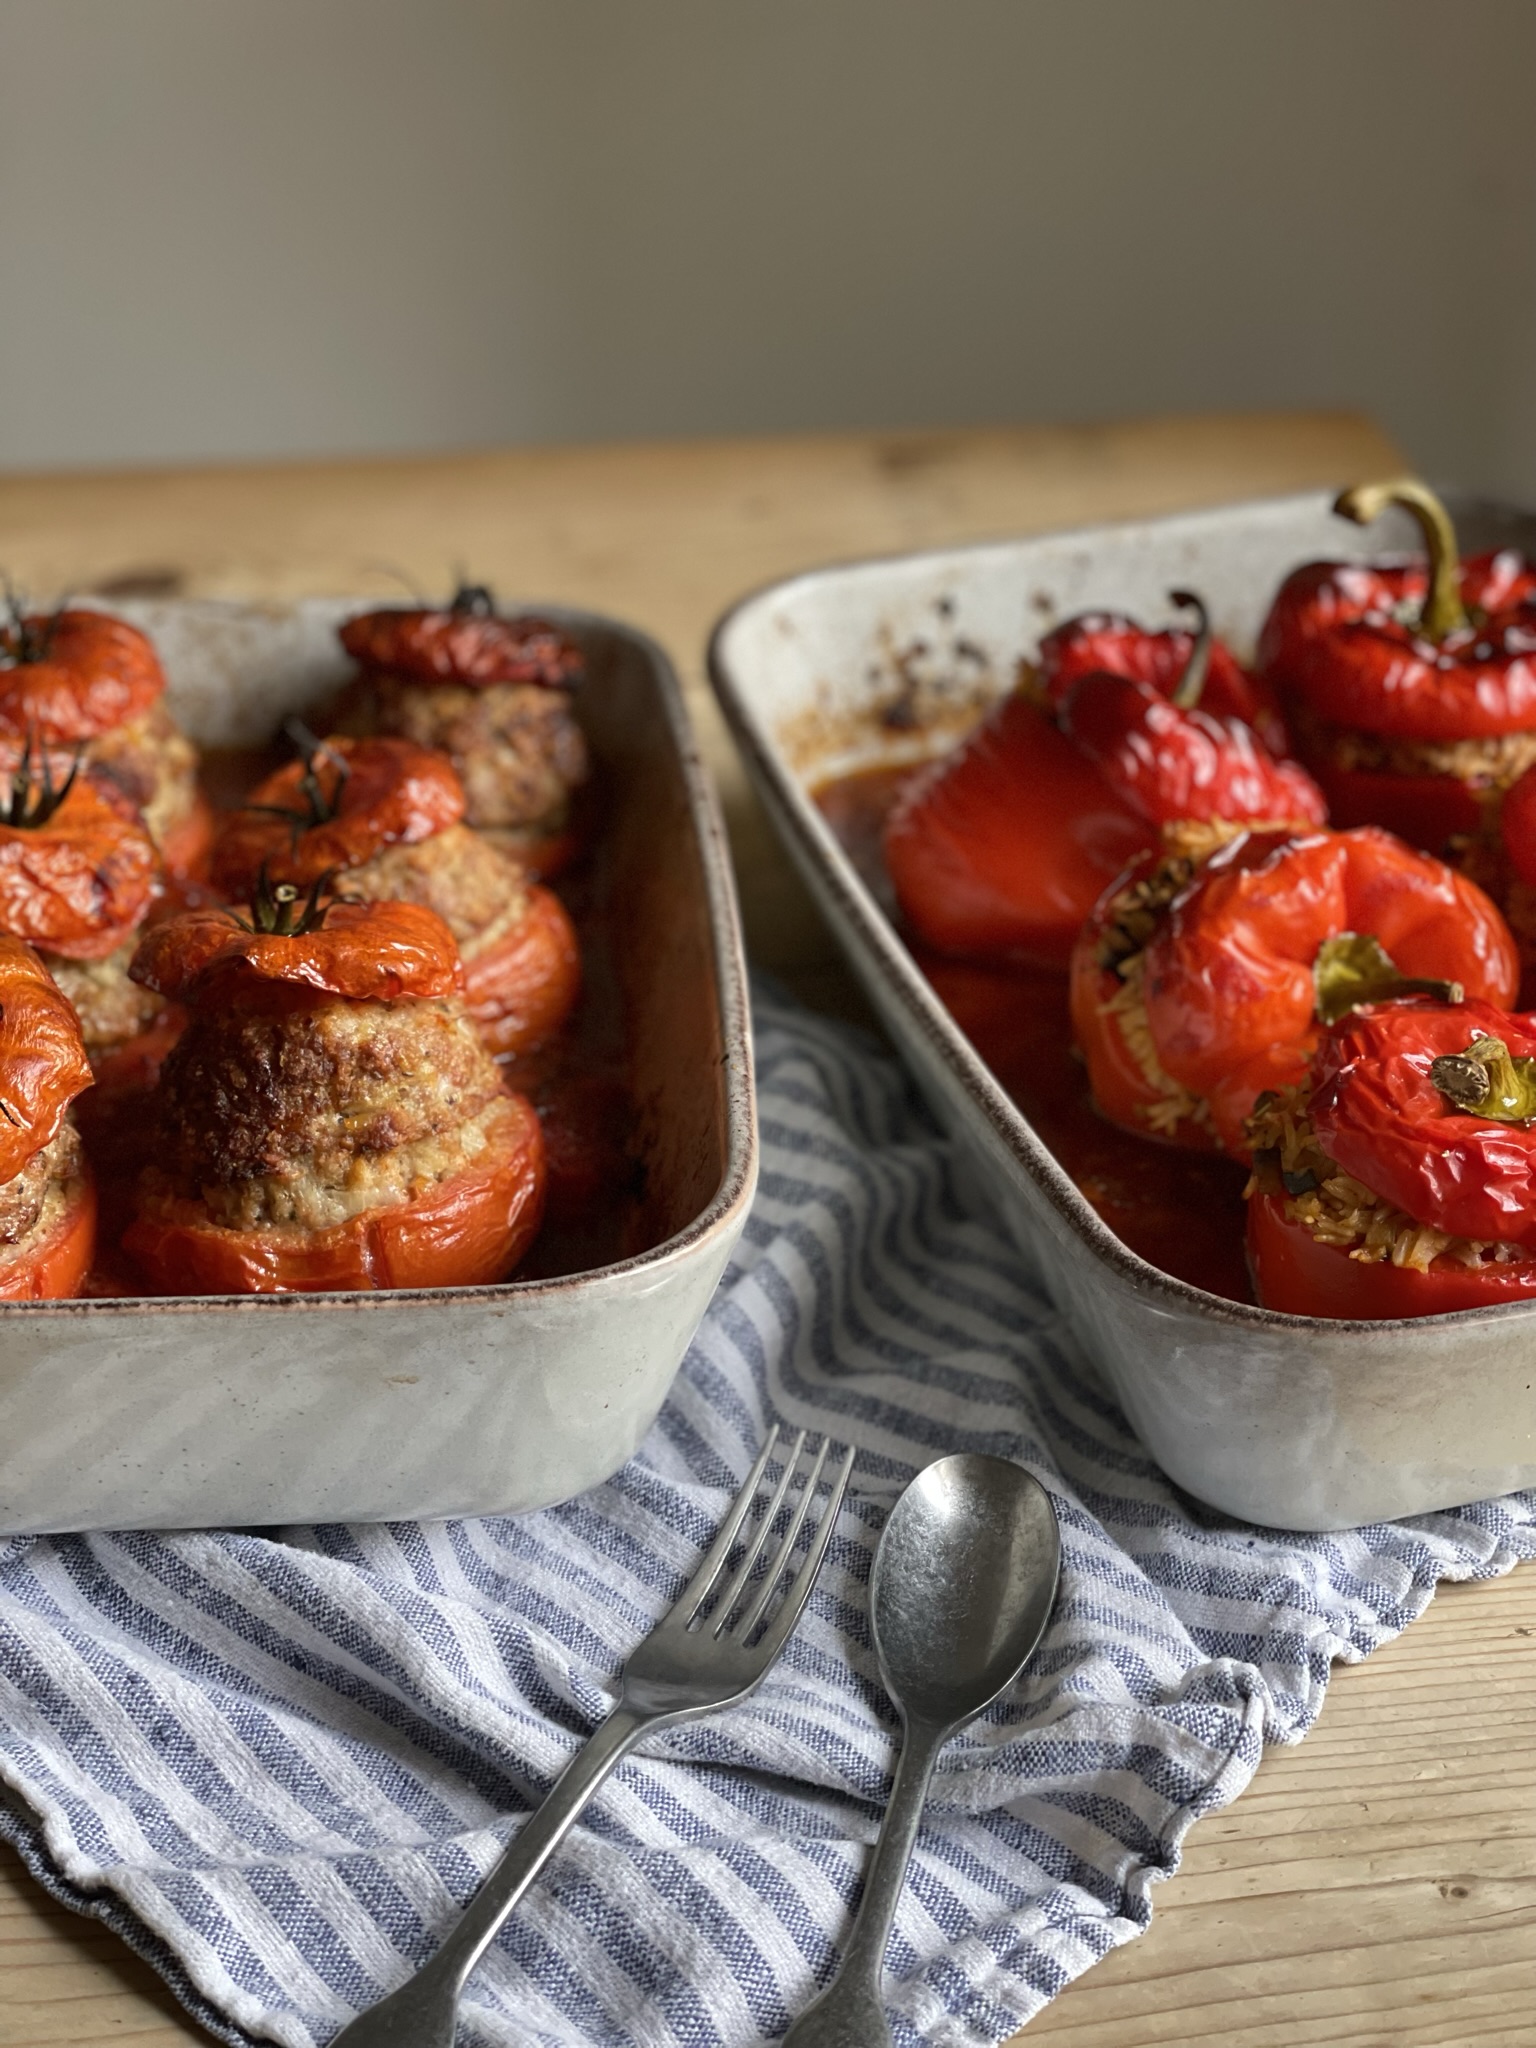 Provencal stuffed pepper and tomatoes - summer vegetables stuffed with herbed rice and beautifully seasoned pork, slow cooked in a rich tomato sauce